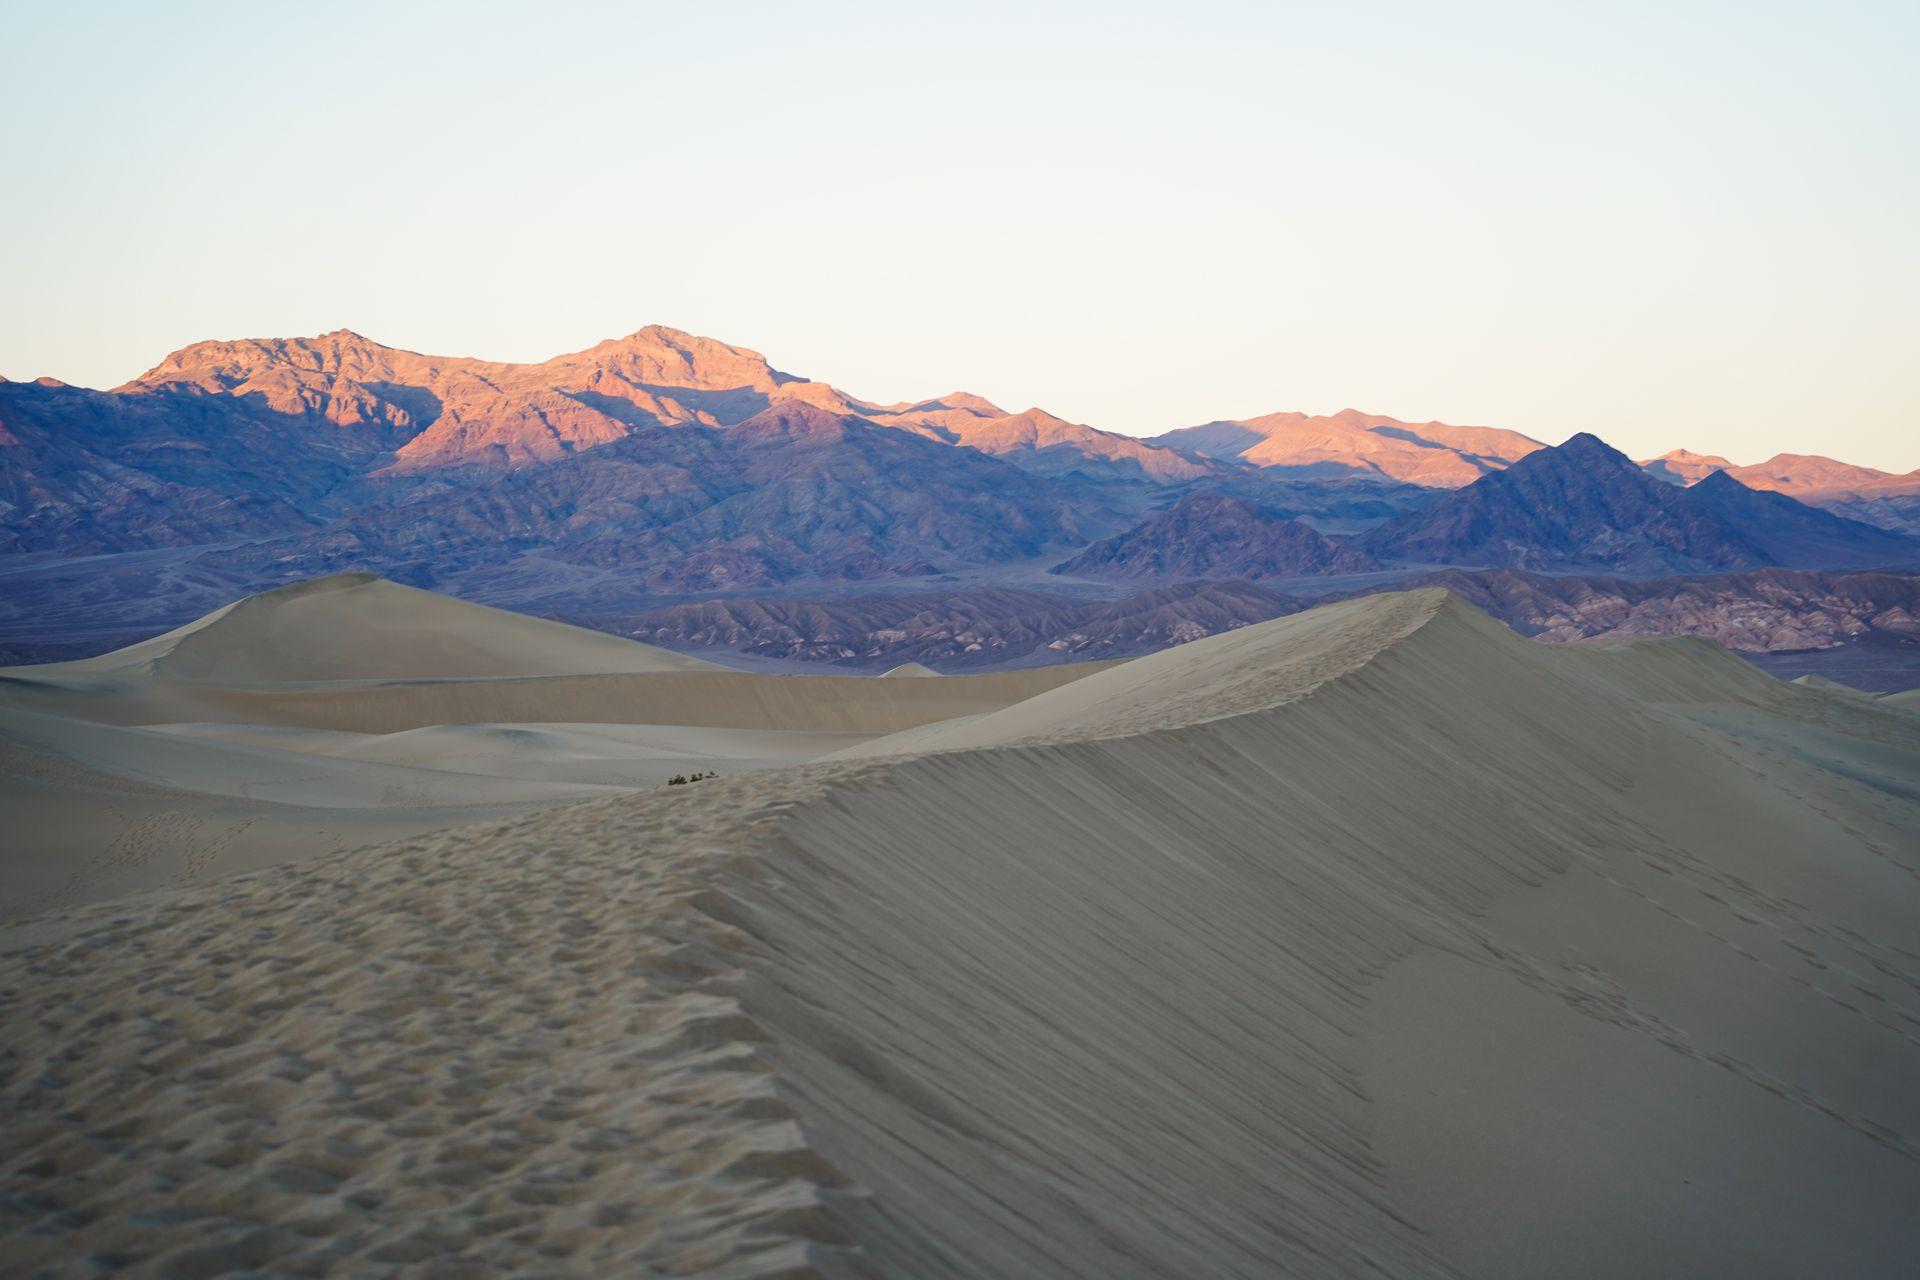 A view of the Mesquite Flat Sand Dunes near sunset. The mountain in the distance glow pink.